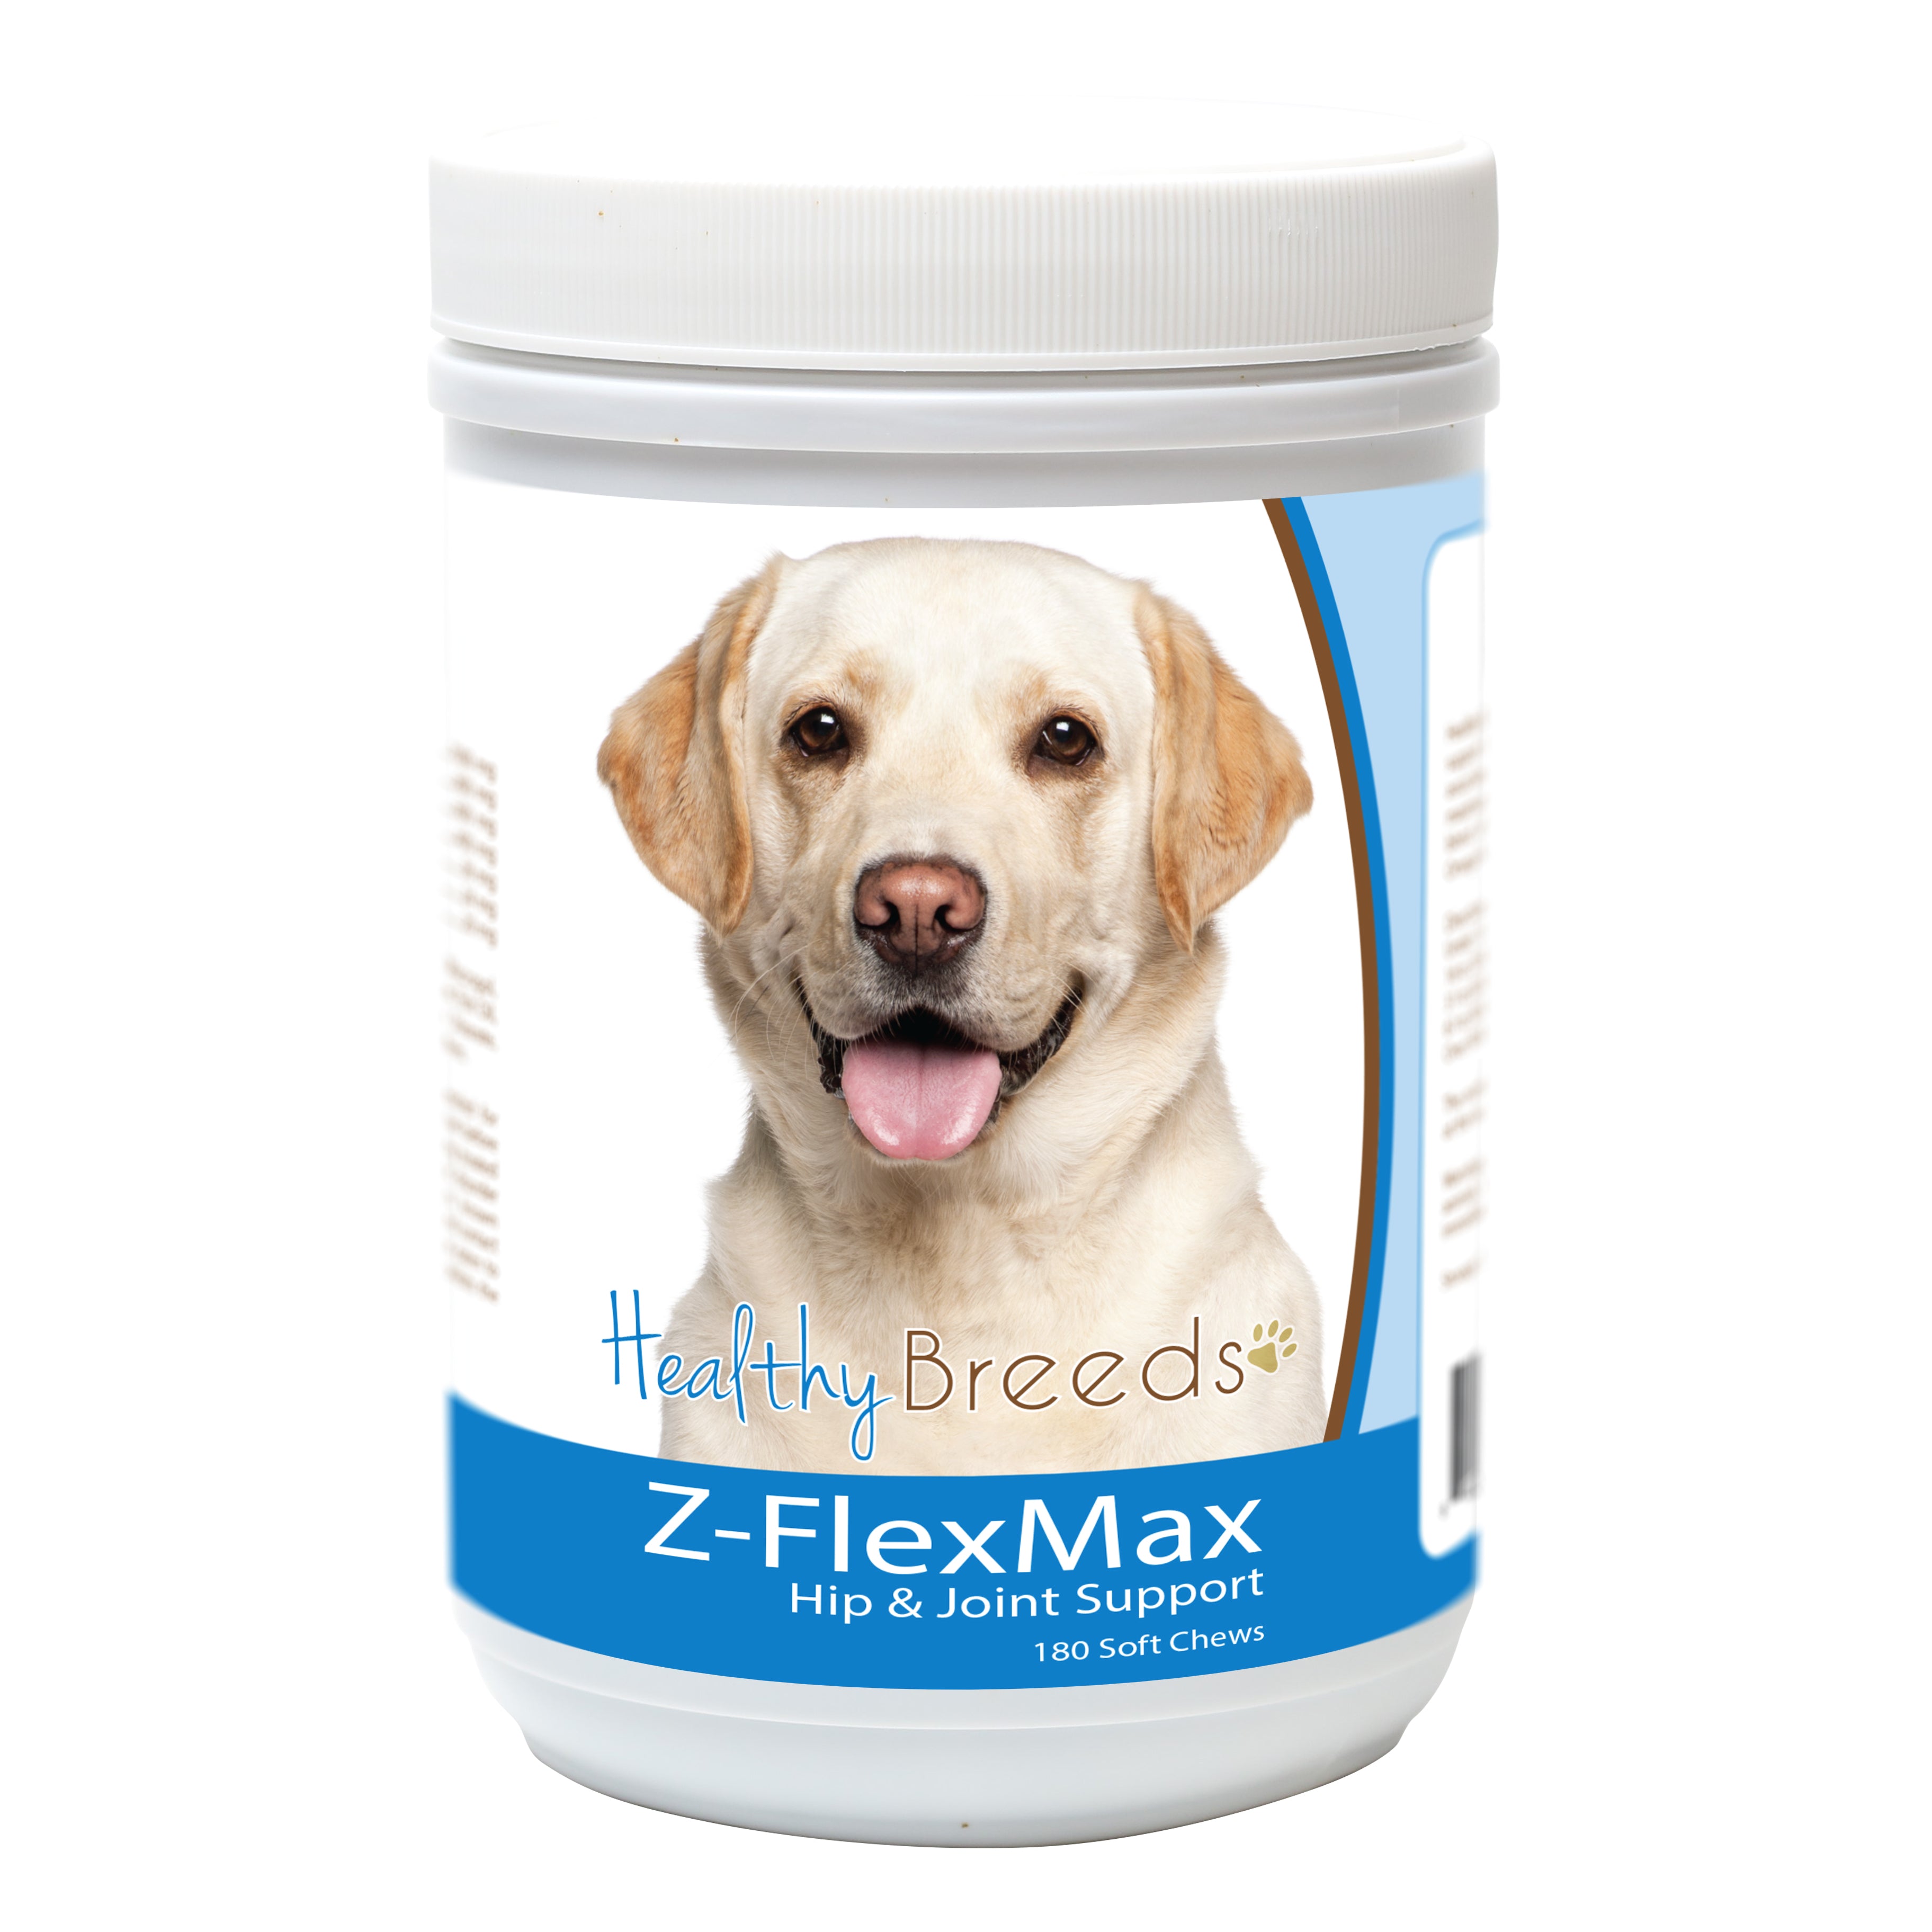 Labrador Retriever Z-Flex Max Dog Hip and Joint Support 180 Count